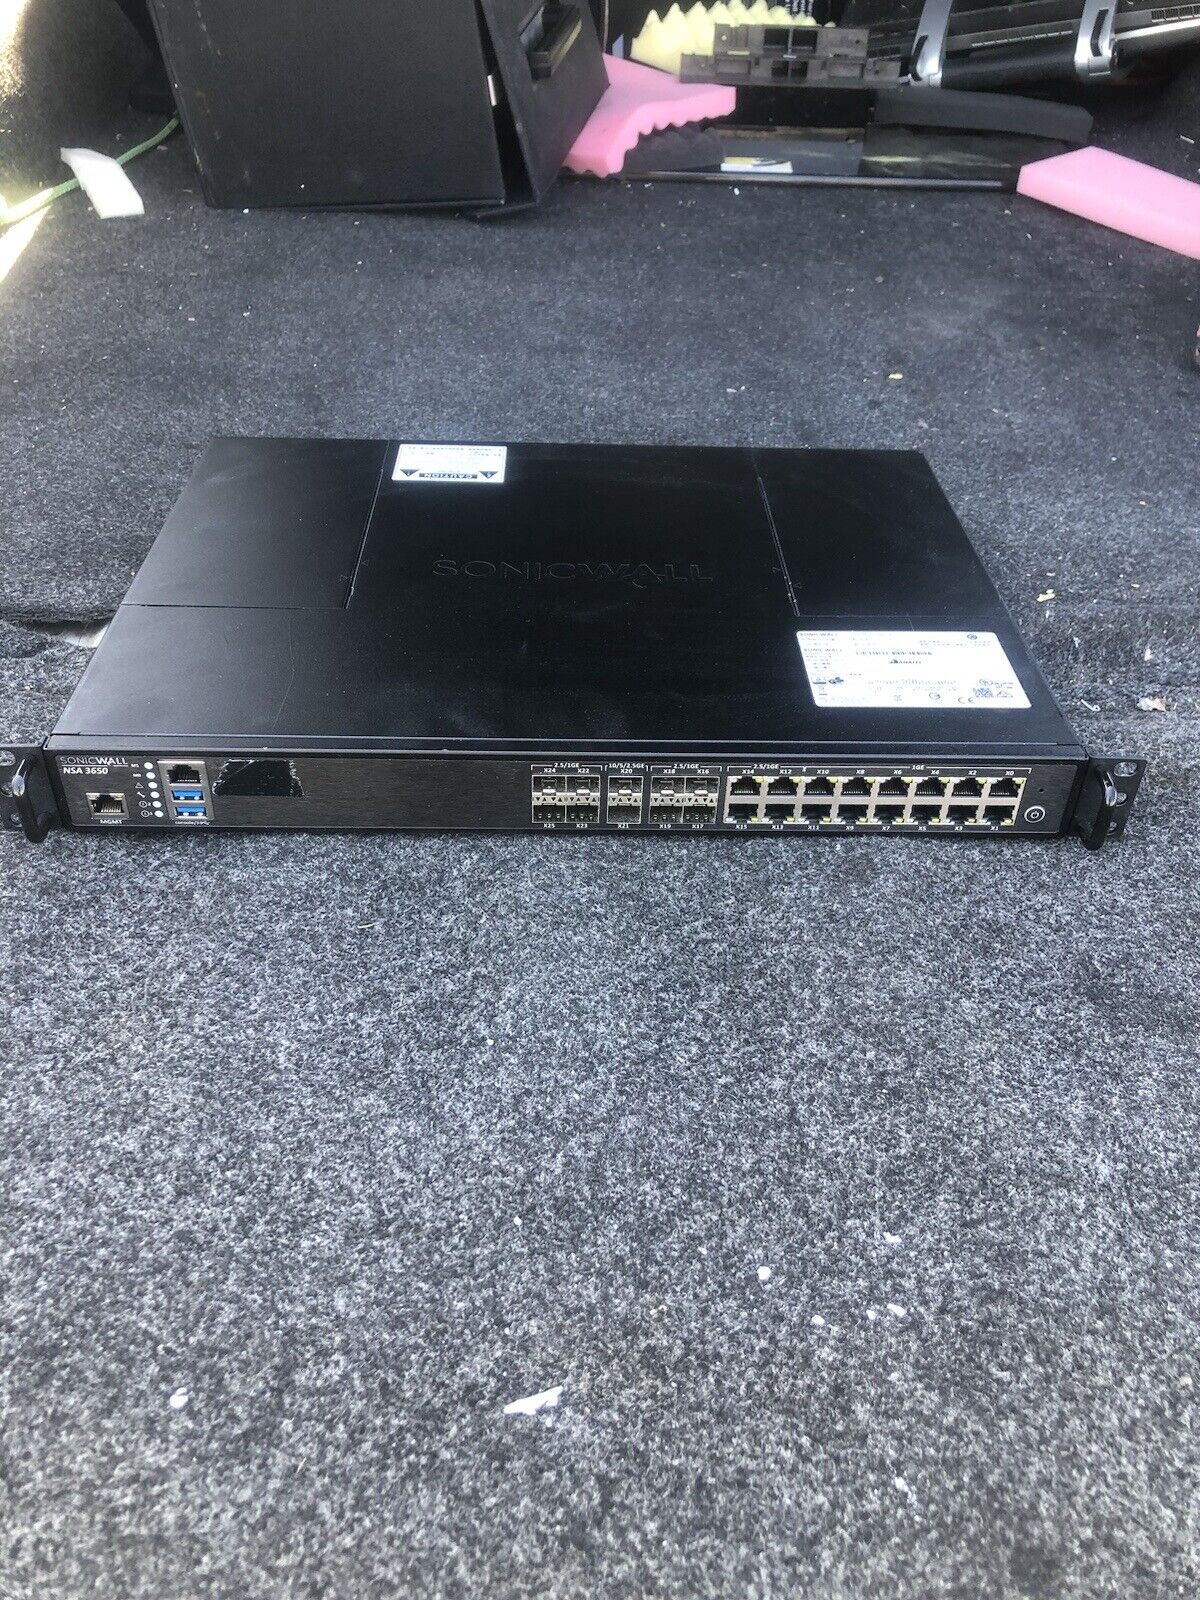 SonicWall NSA 3650 Network Security/Firewall Appliance - Transfer Unknown